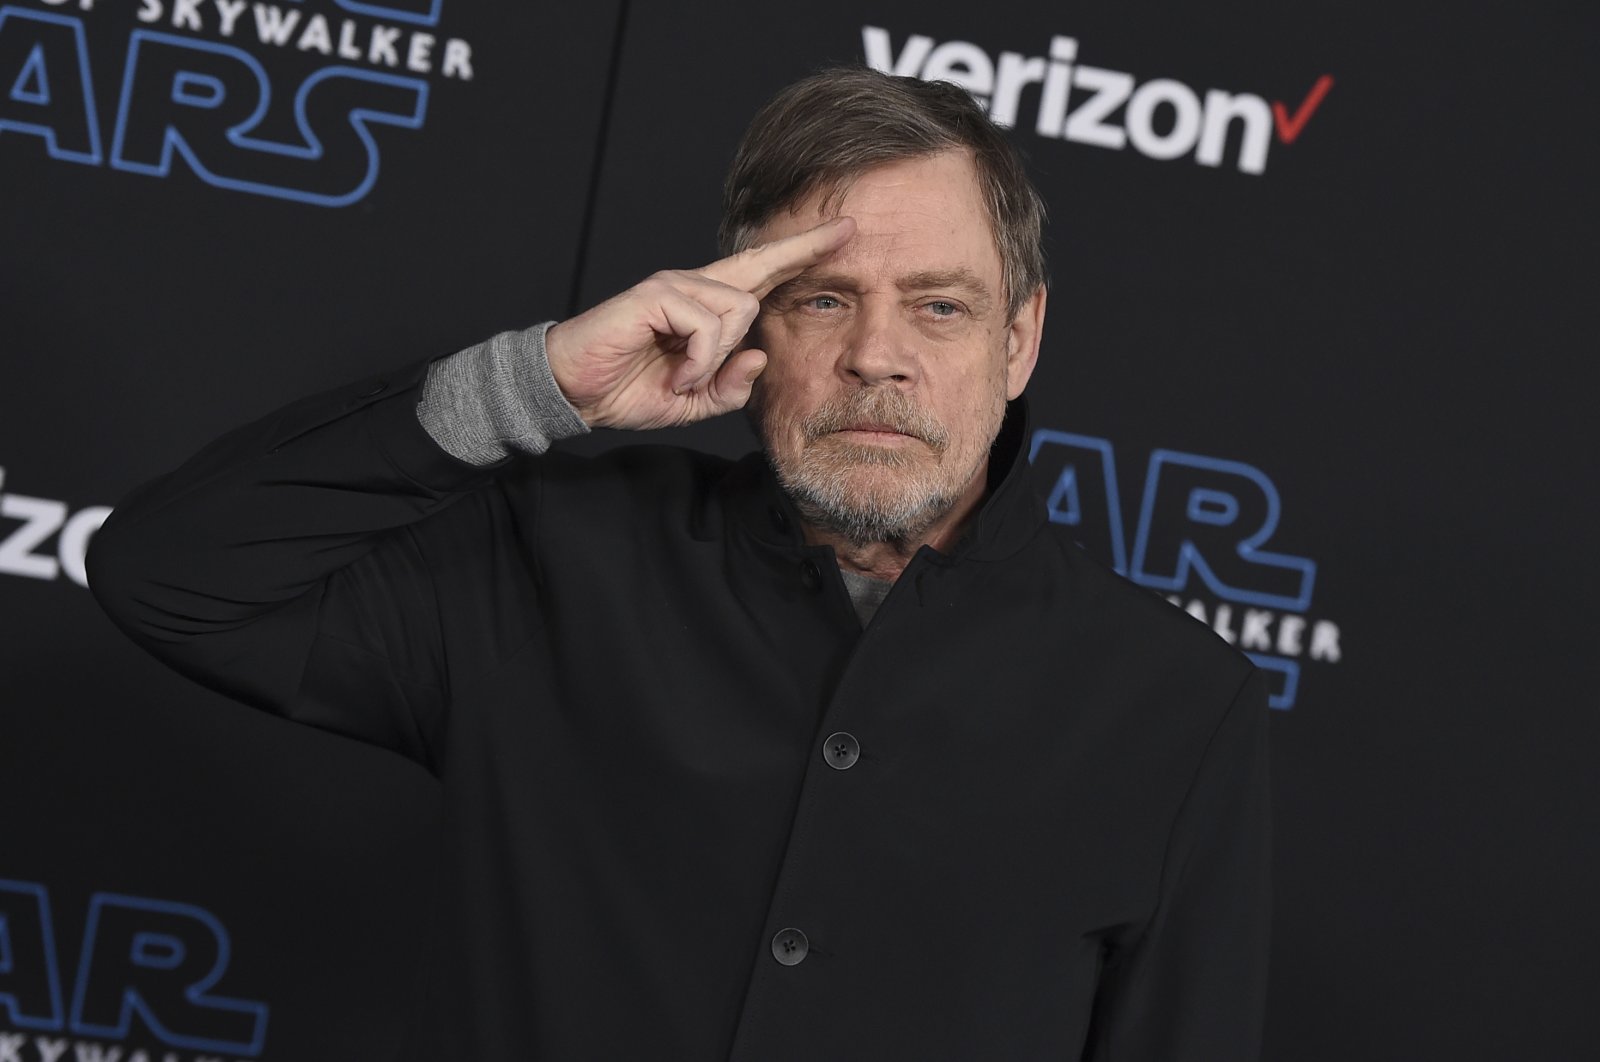 Mark Hamill salutes as he arrives at the world premiere of "Star Wars: The Rise of Skywalker" in Los Angeles, U.S., Dec. 16, 2019. (AP Photo)